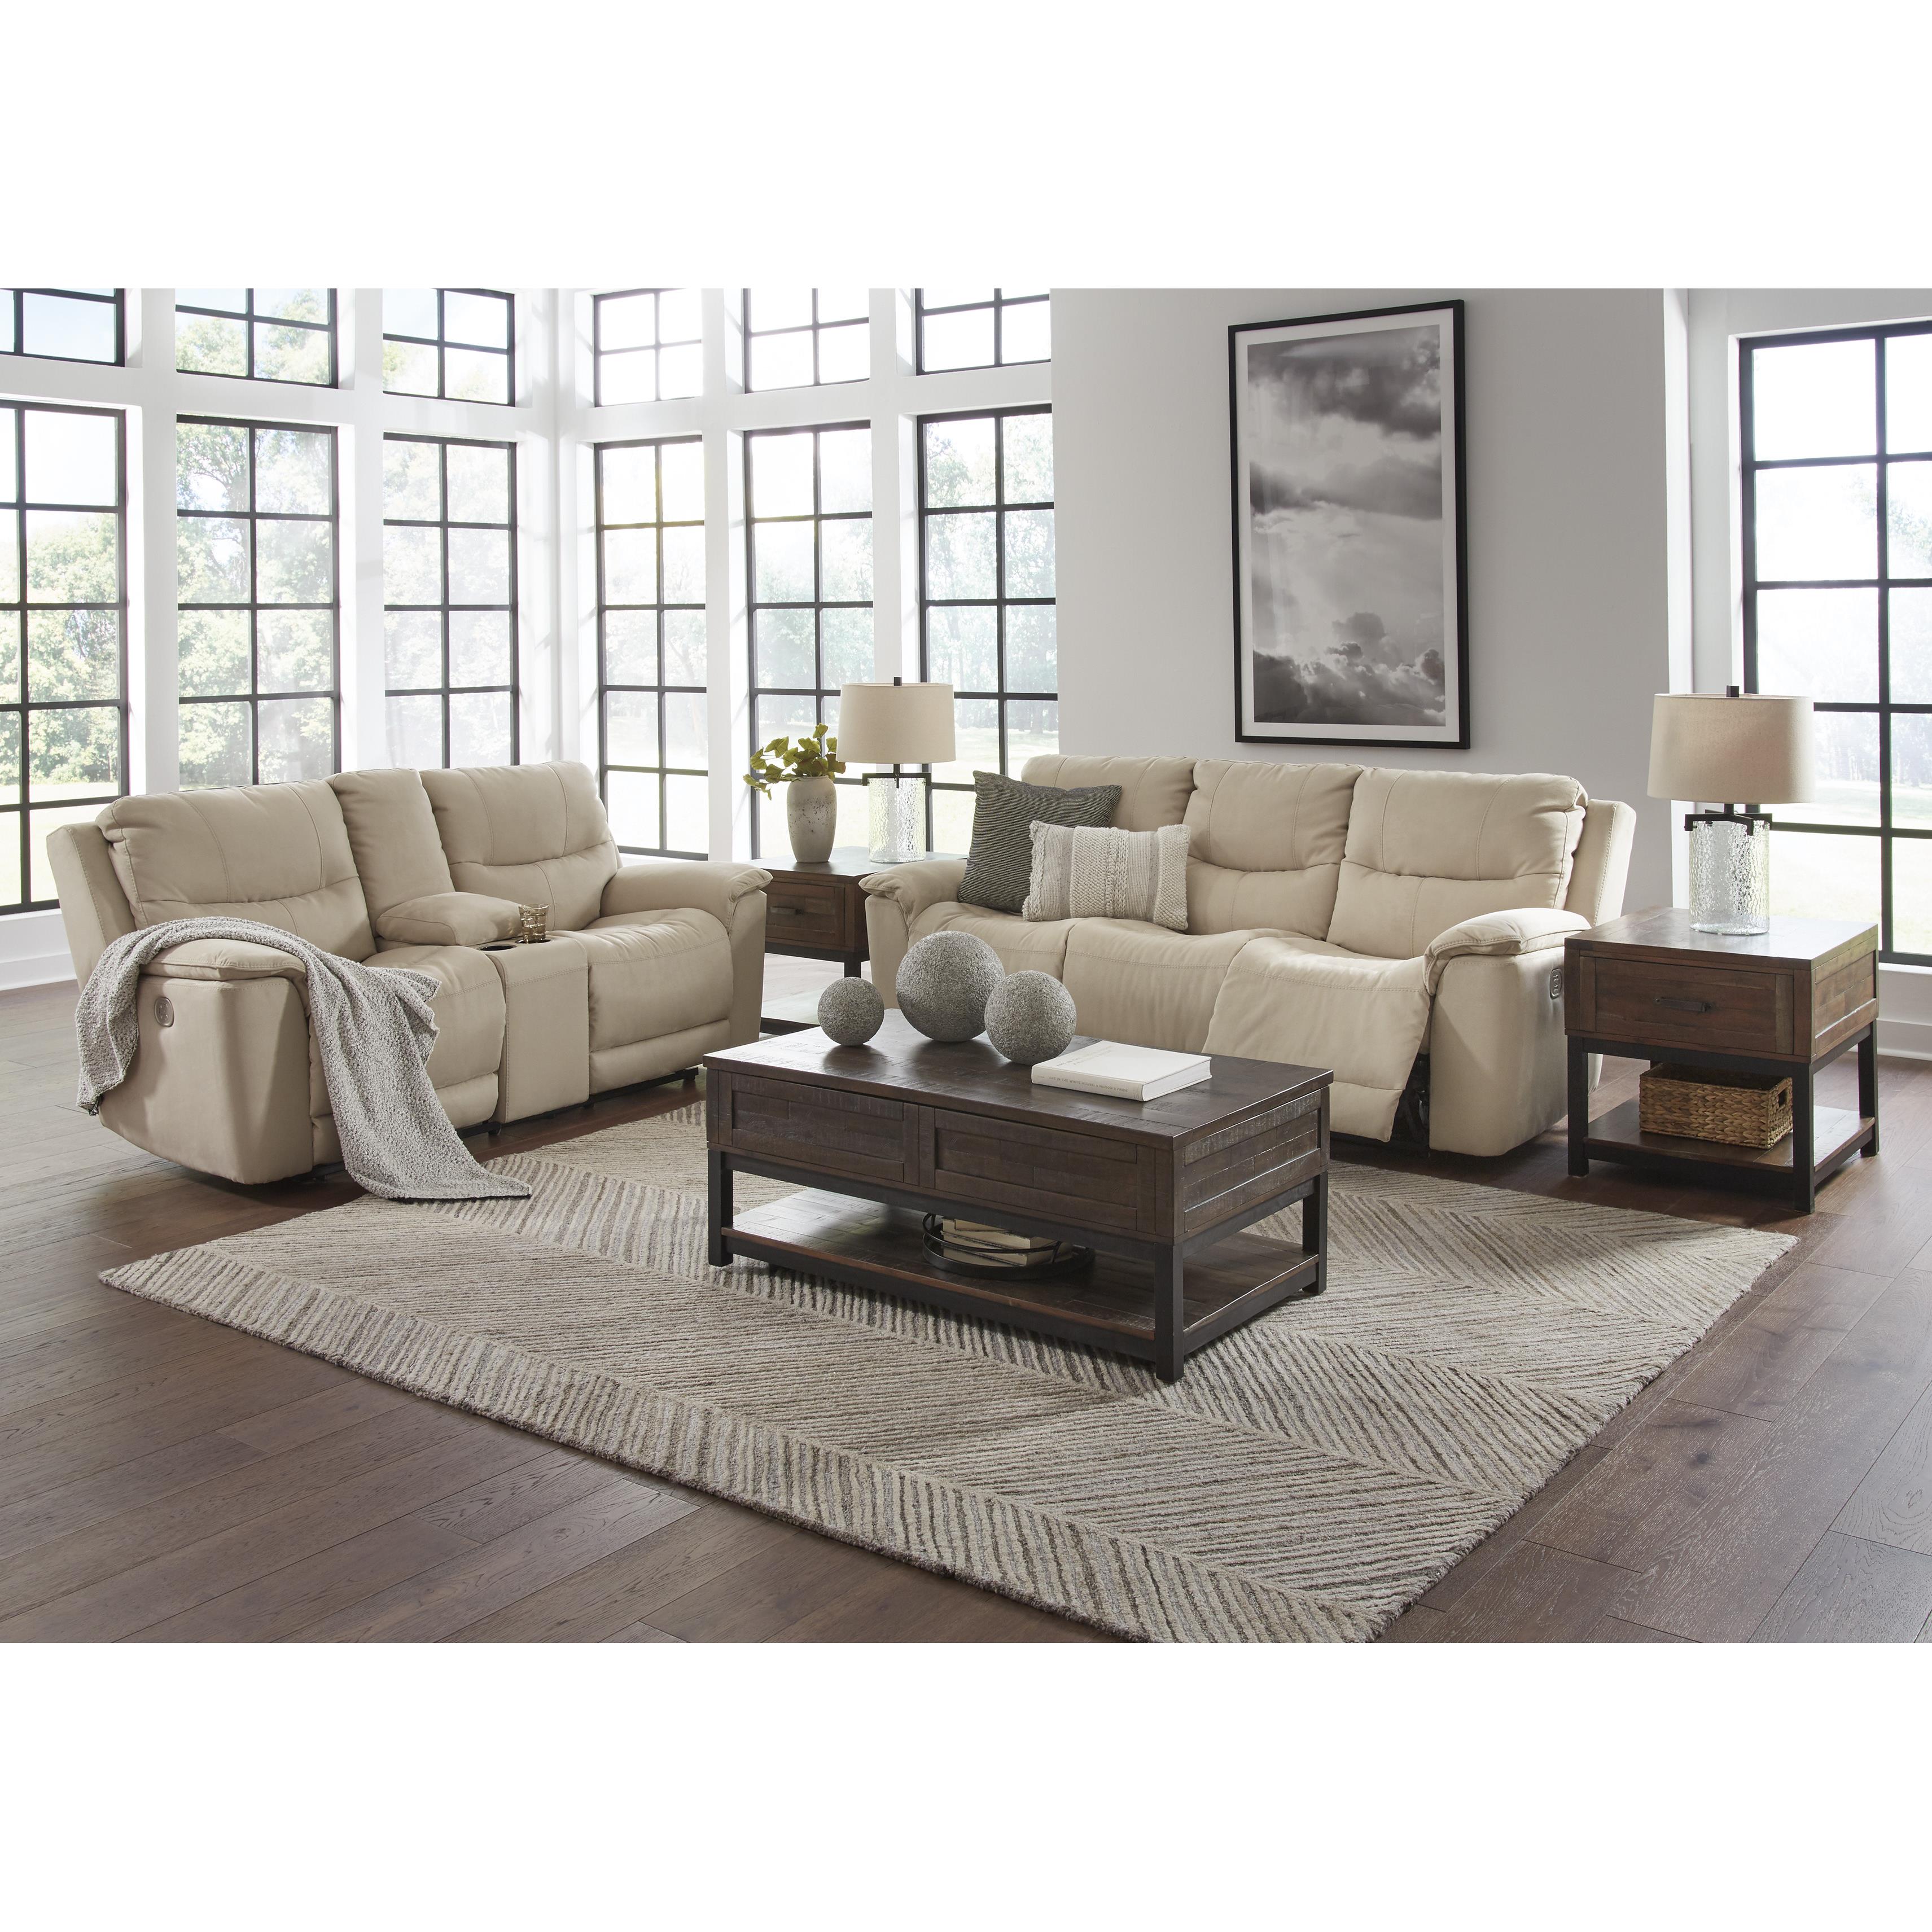 Signature Design by Ashley Next-Gen Gaucho Power Reclining Leather Look Sofa 6080715 IMAGE 12